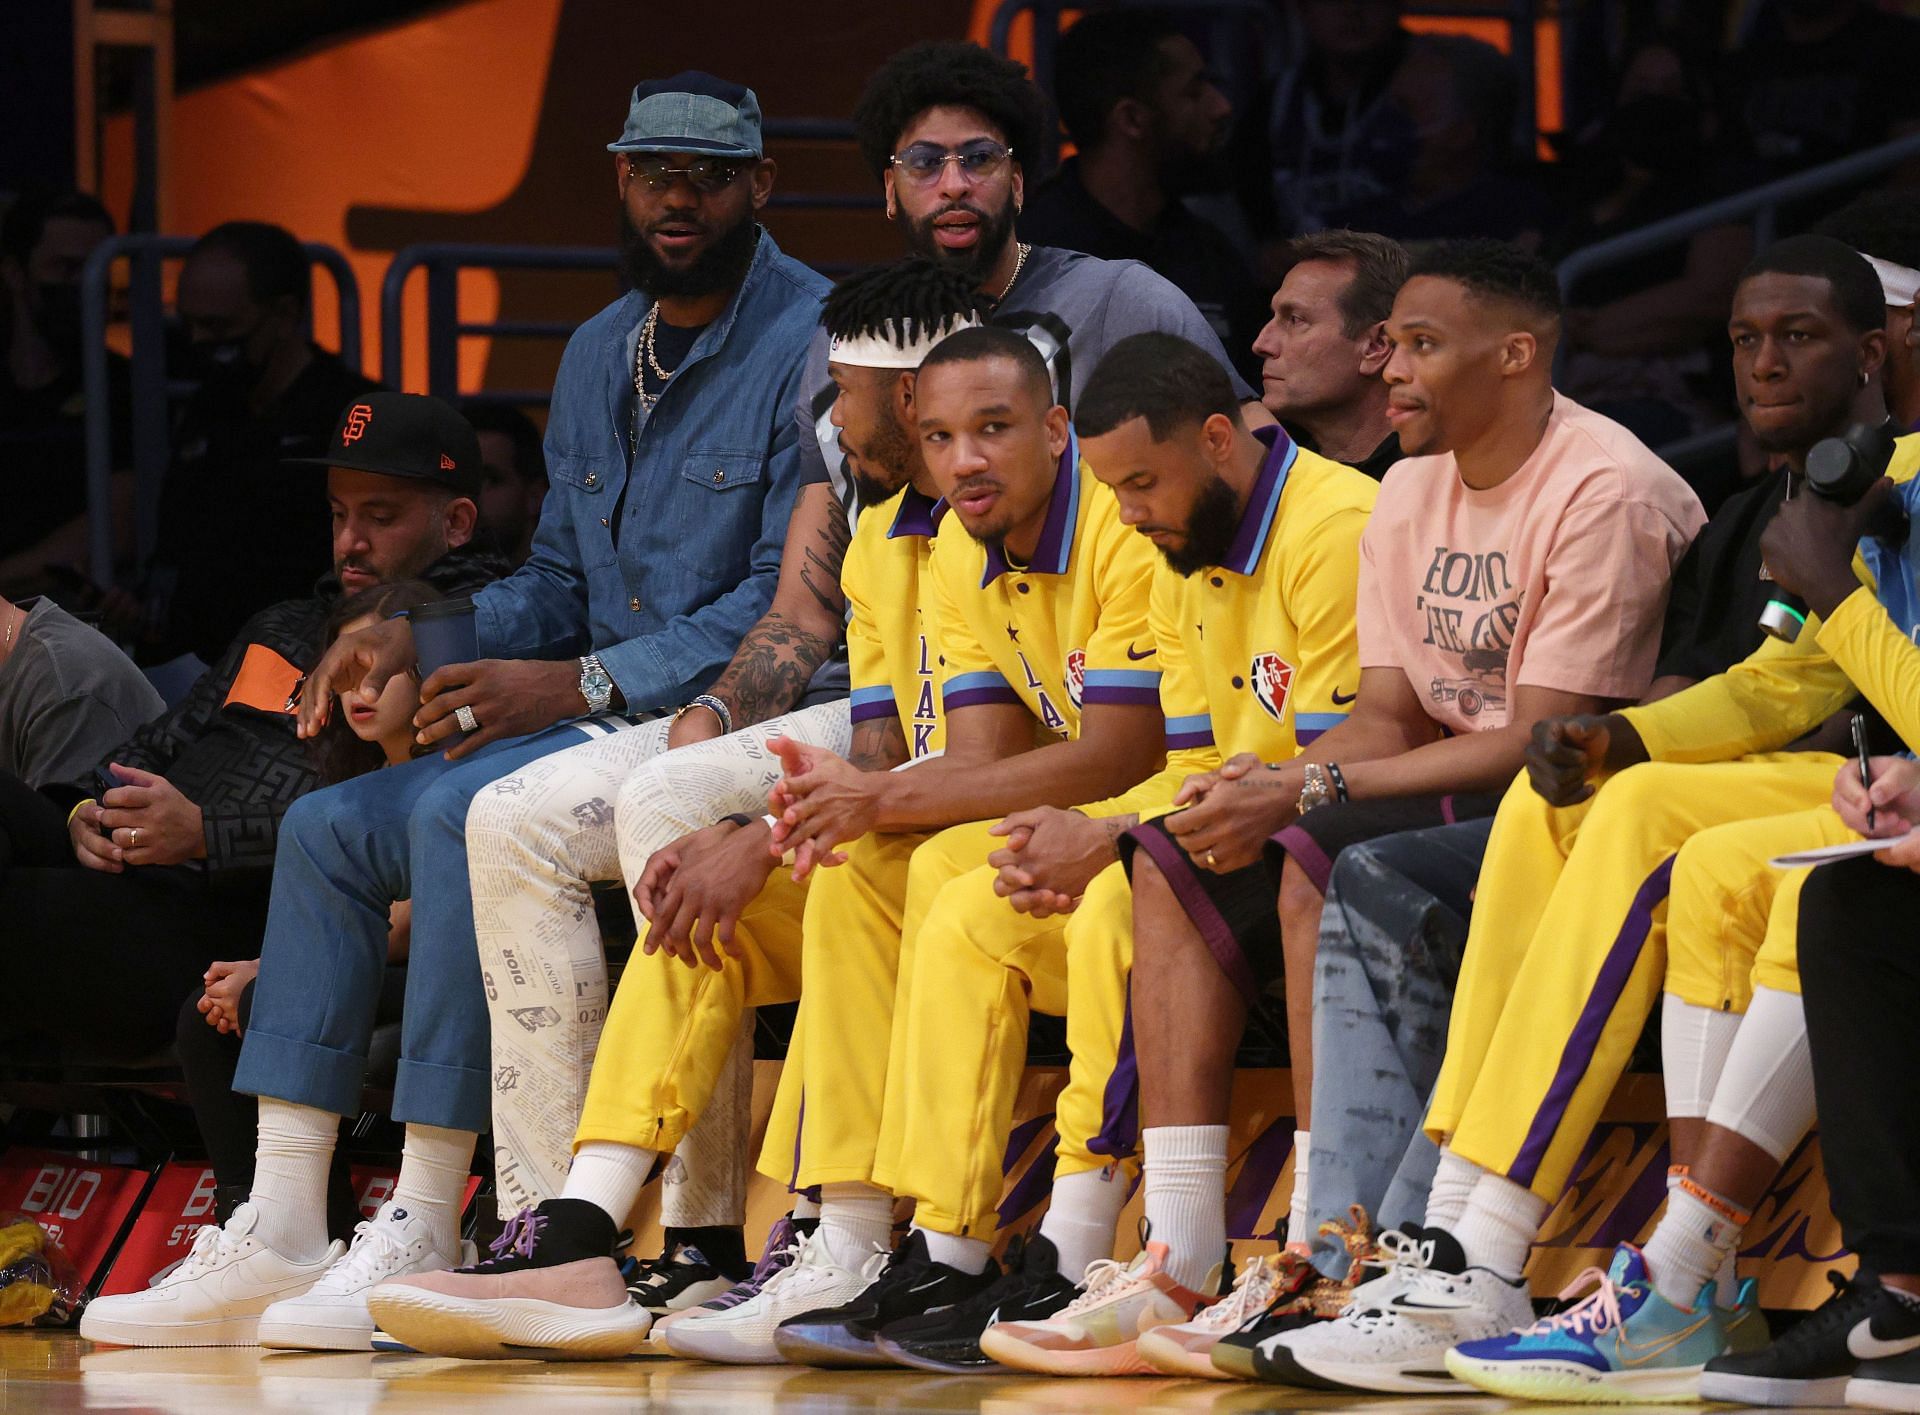 LeBron James and Anthony Davis (far left) of the LA Lakers on the bench